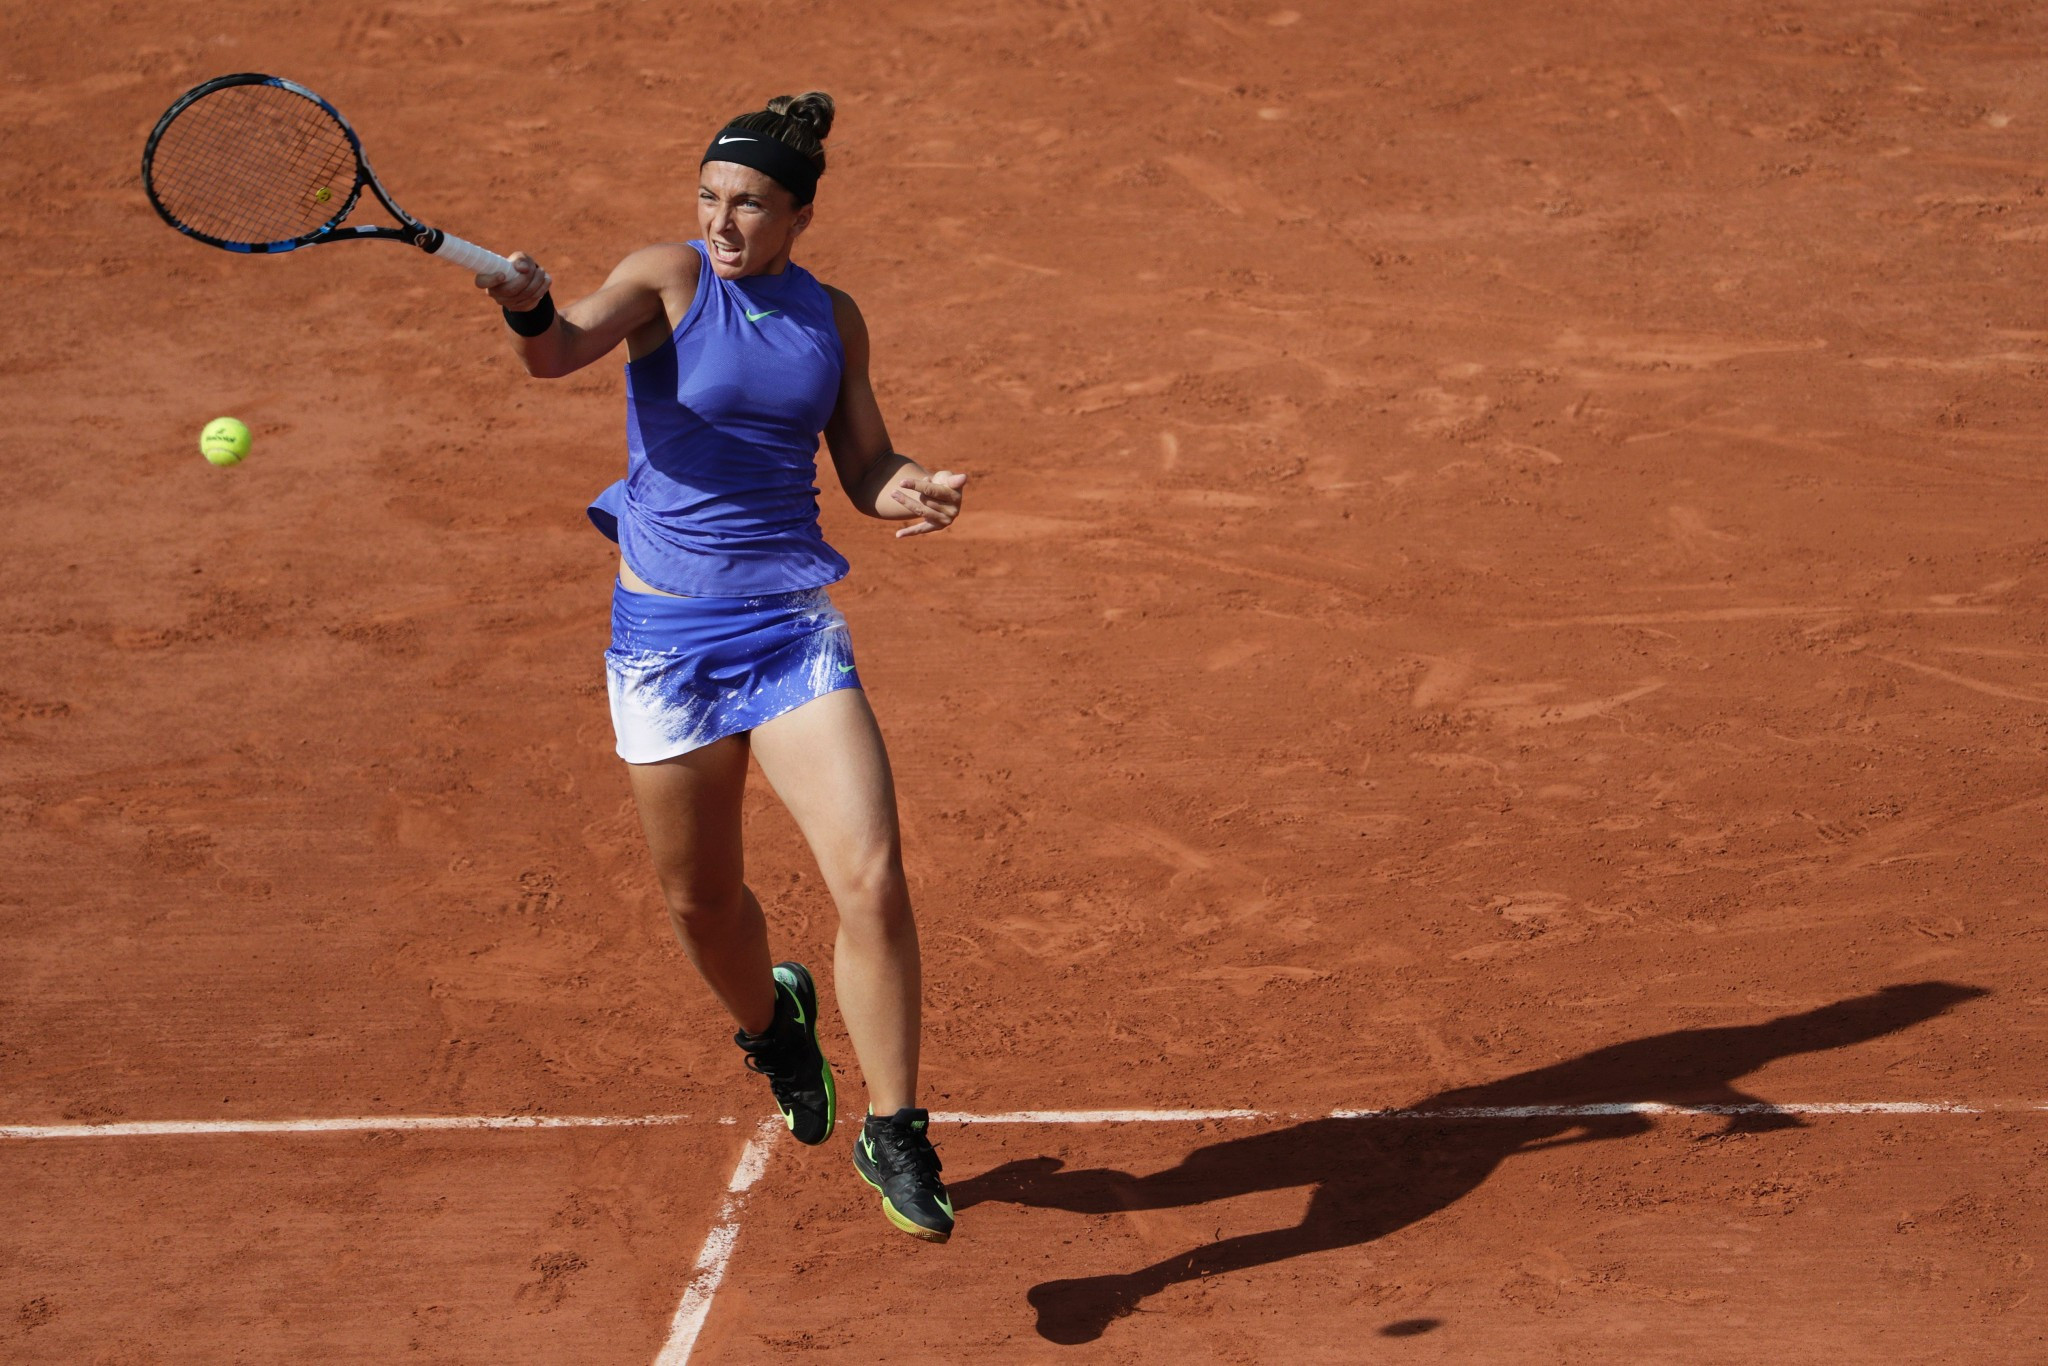 Italy's Sara Errani reached the French Open final in 2012 ©Getty Images